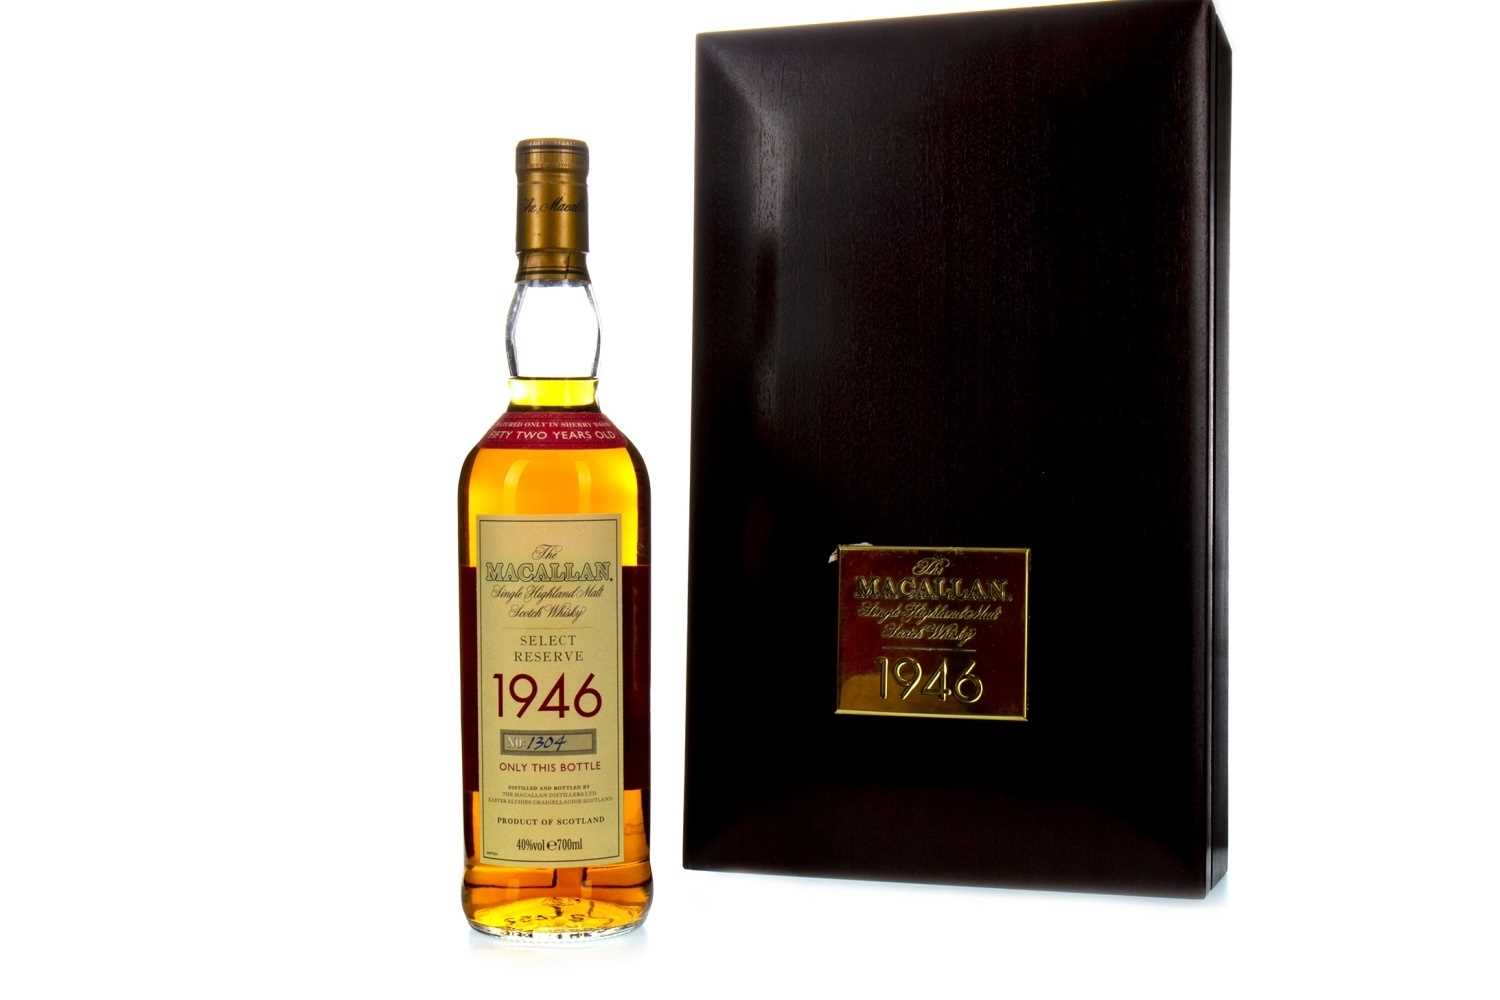 Lot 88 - MACALLAN 1946 SELECT RESERVE 52 YEARS OLD